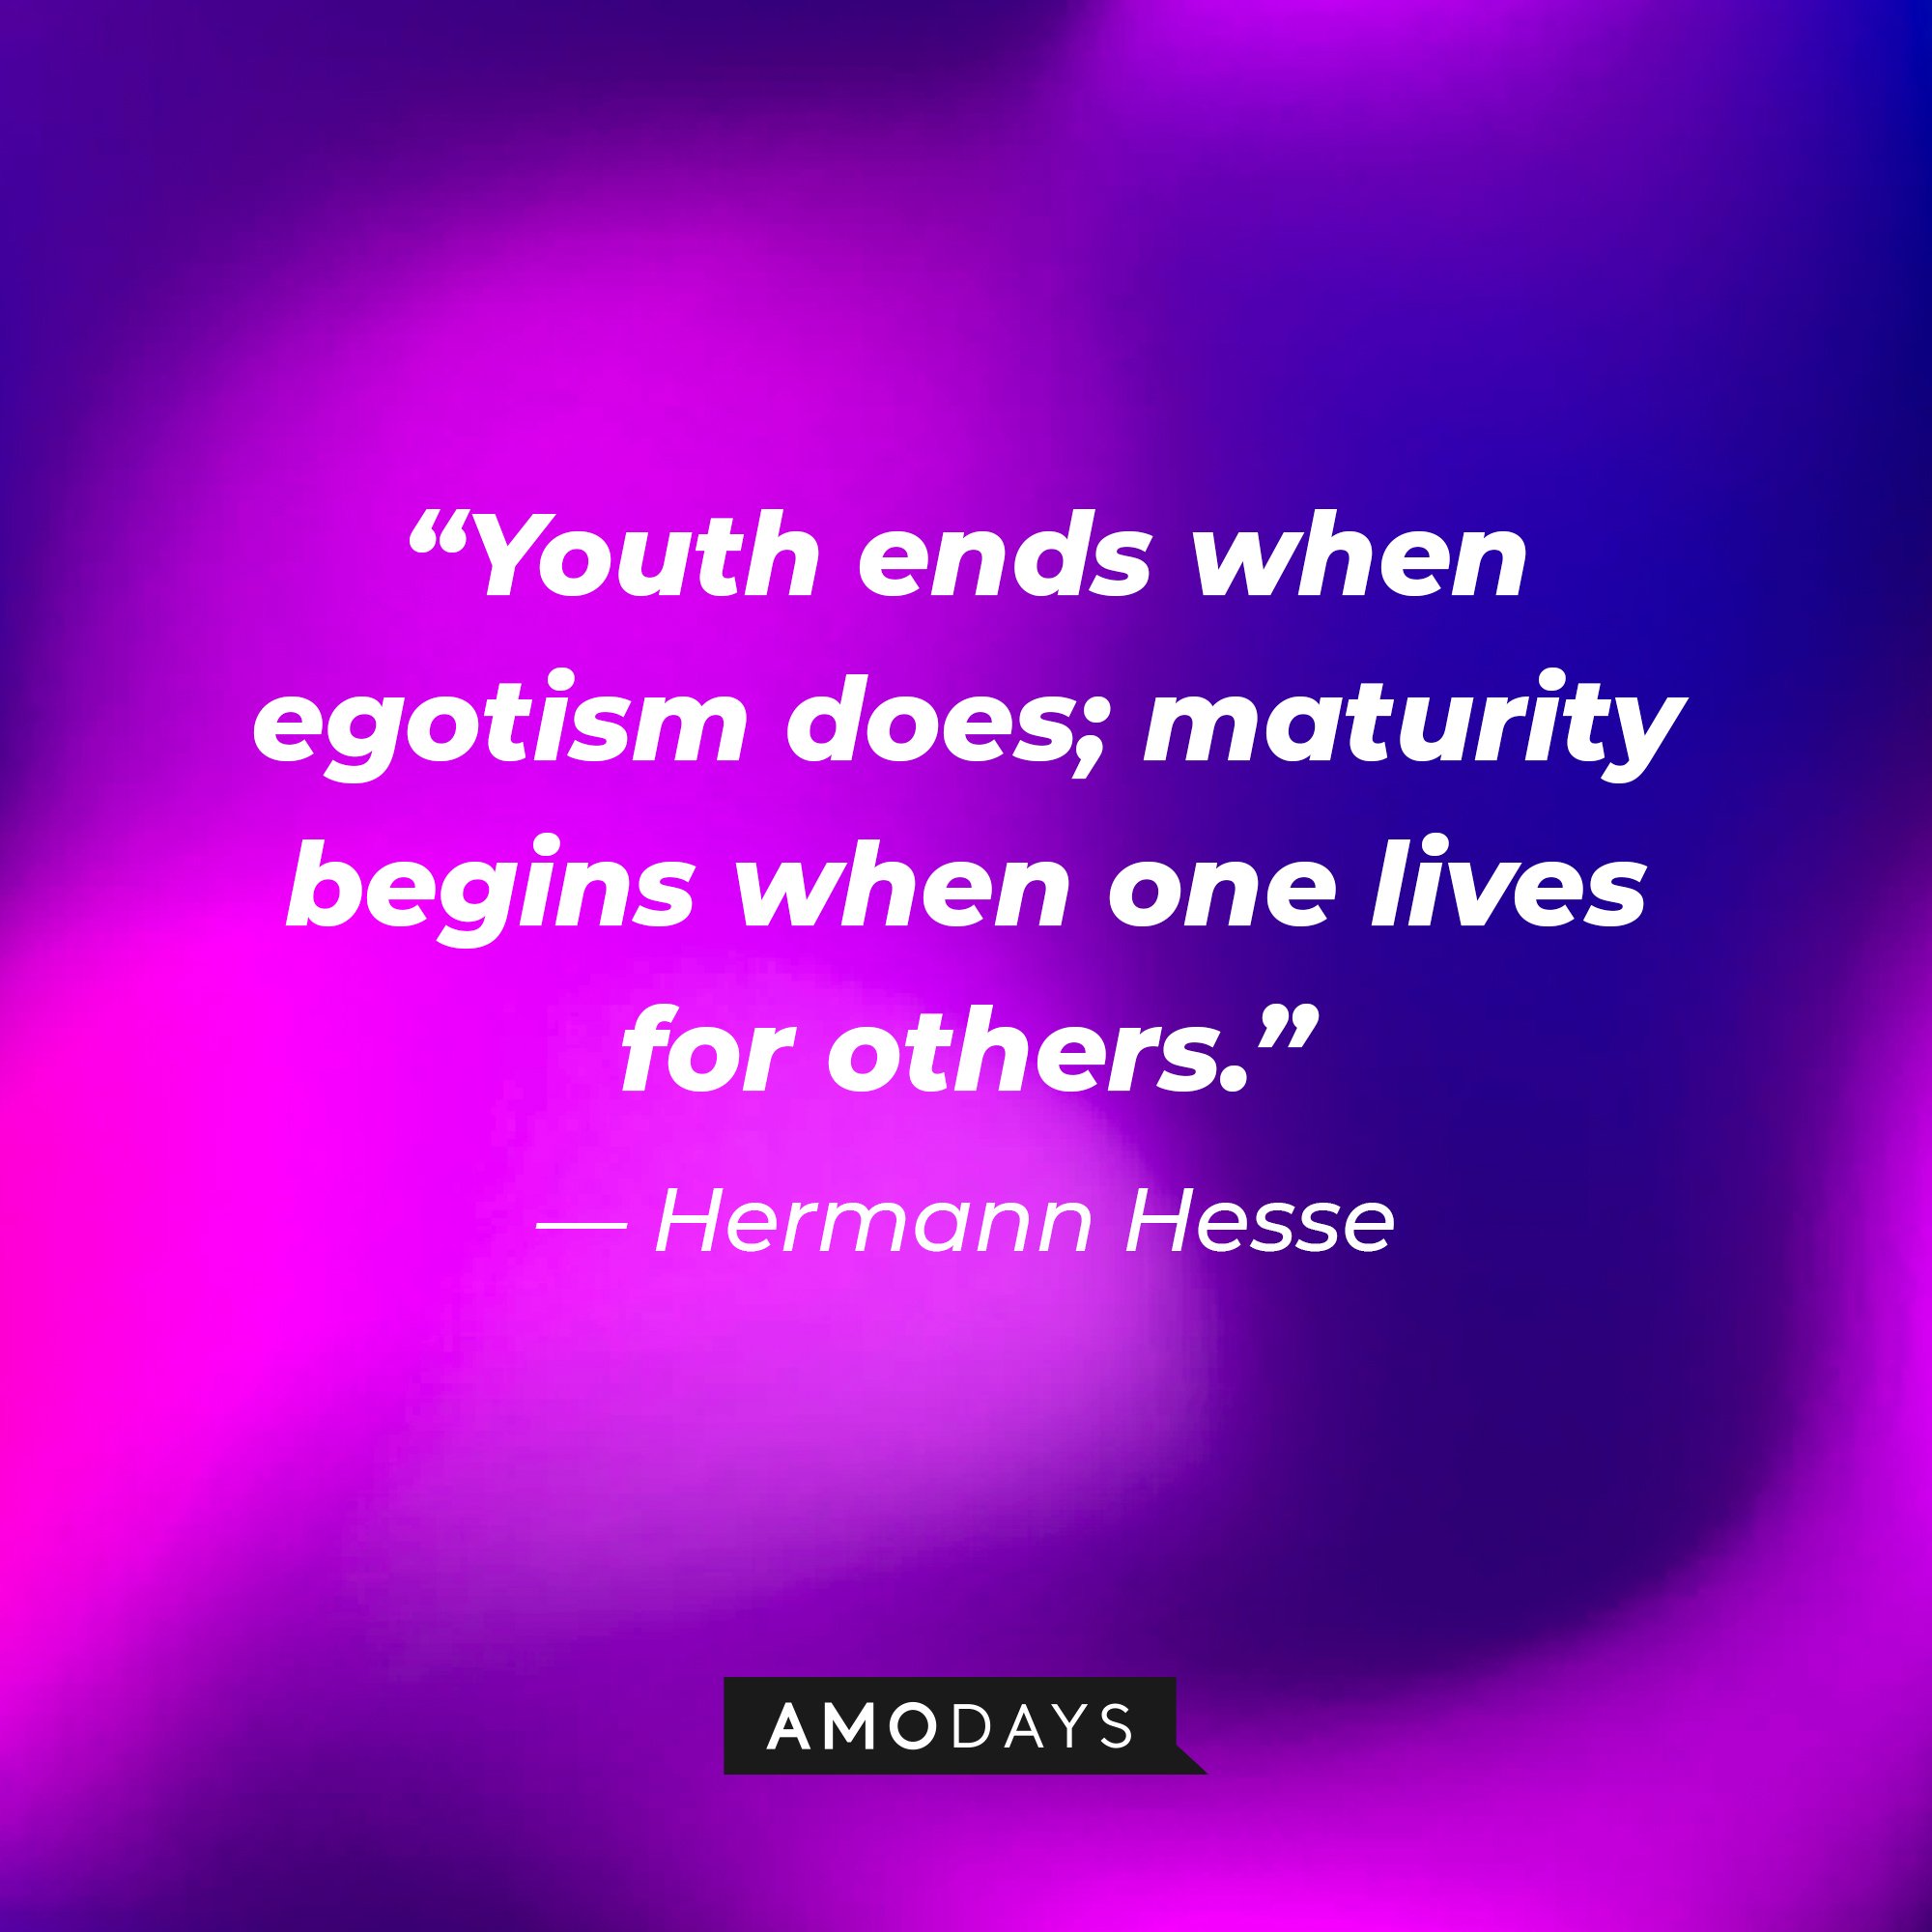  Hermann Hesse's quote: “Youth ends when egotism does; maturity begins when one lives for others.” | Image: AmoDays